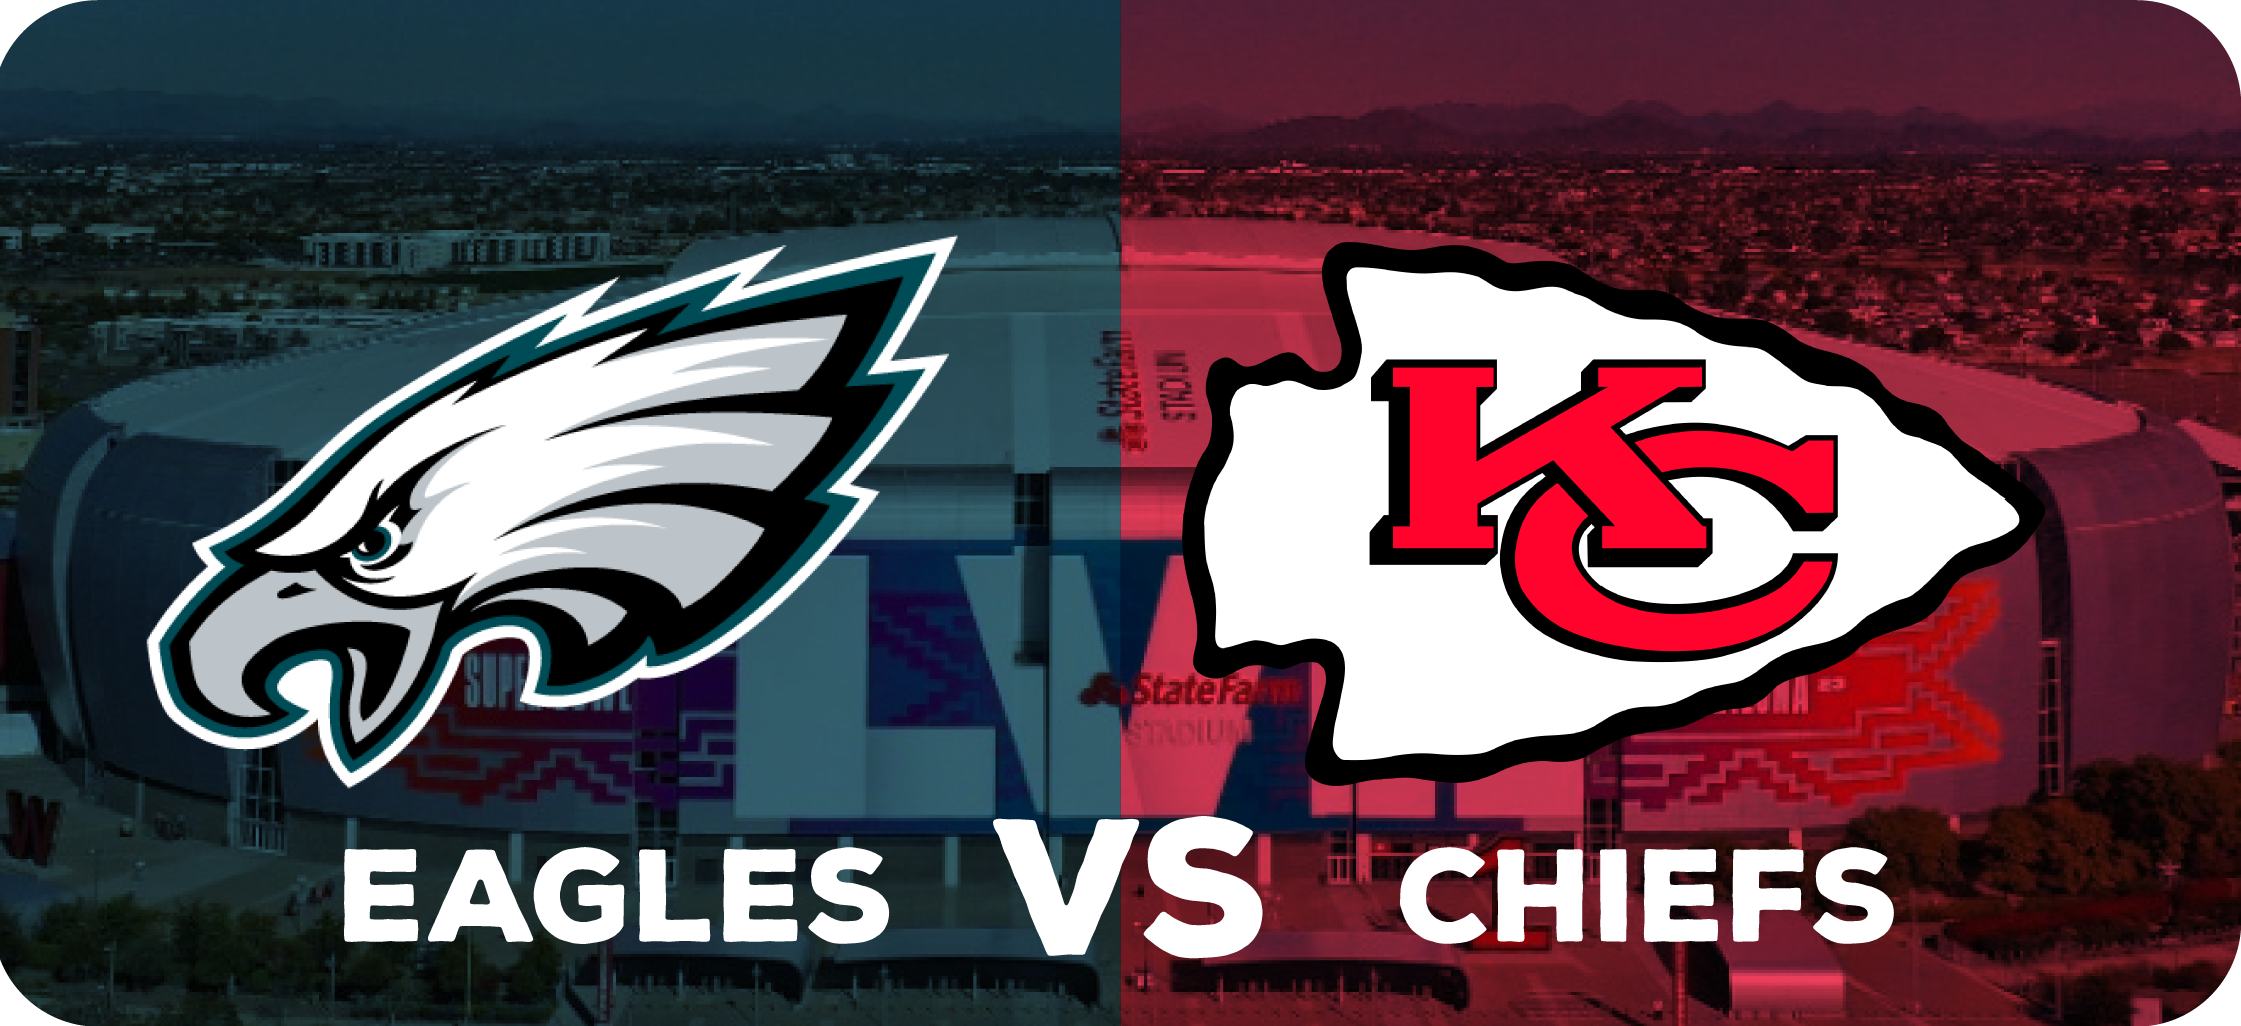 For this game the Eagles spread is -1.5 -110